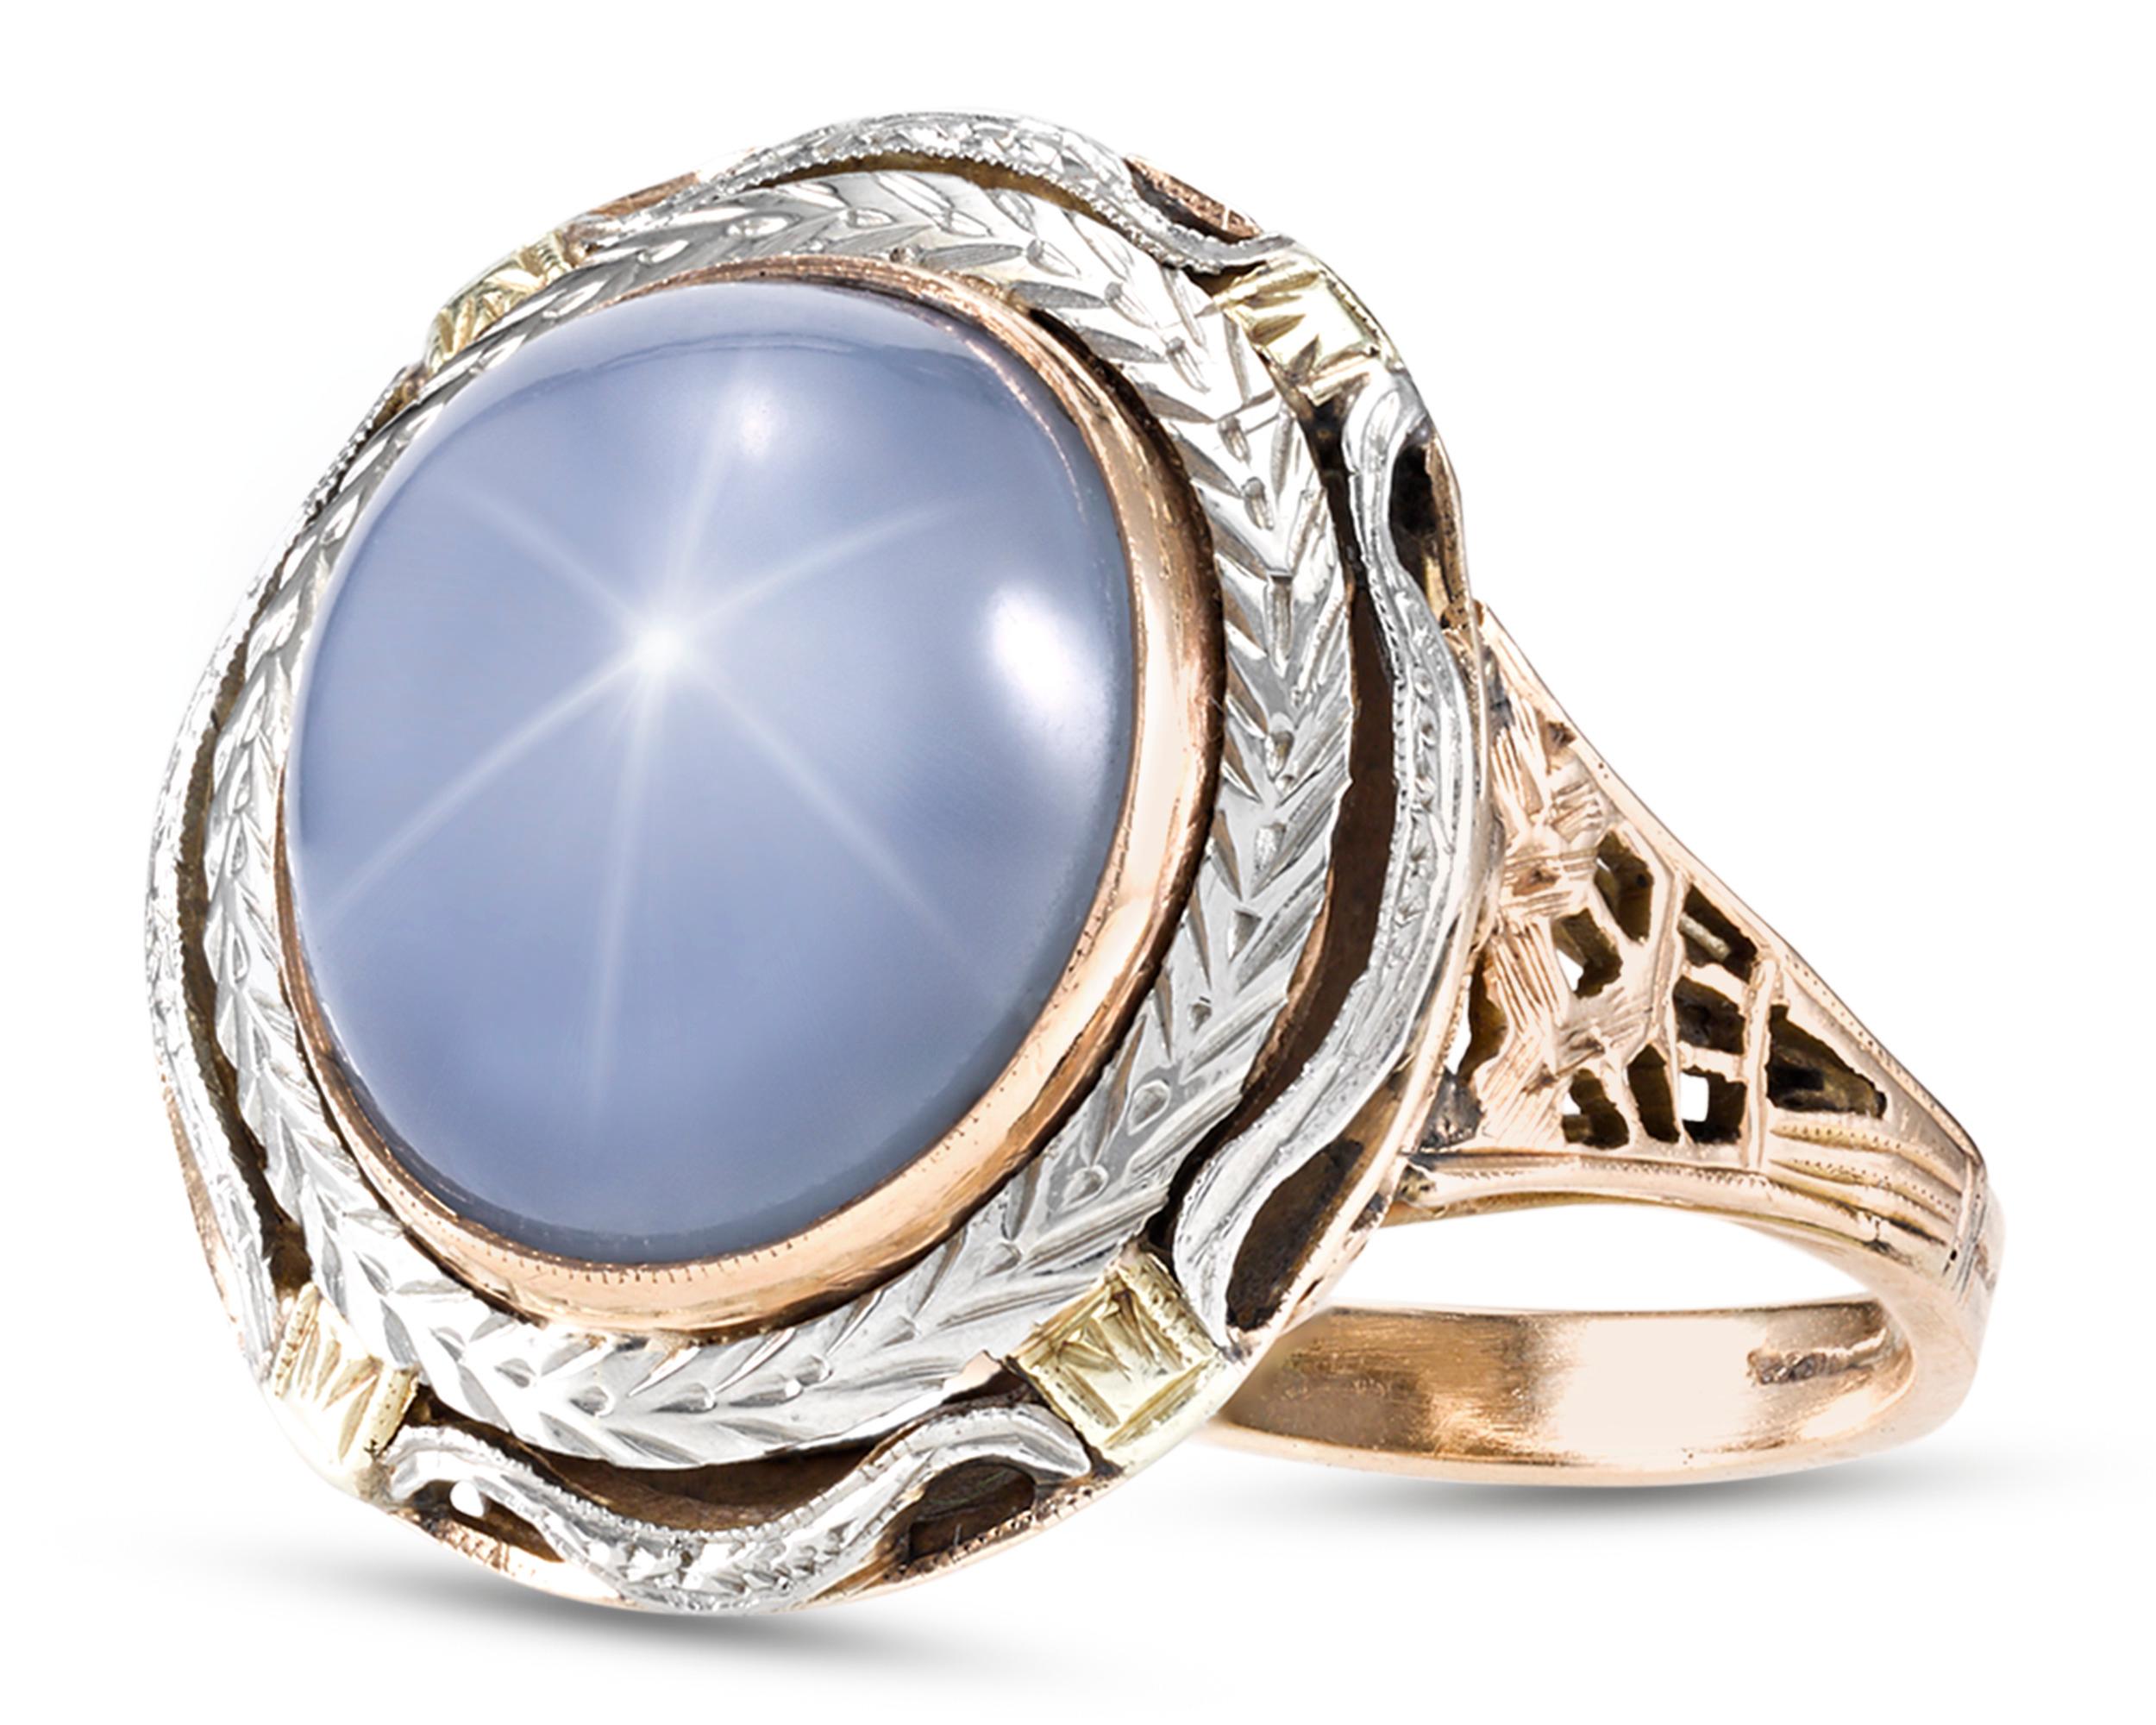 An incredible 12.39-carat star sapphire showcases a luminous cornflower blue hue in this striking ring. The fabulous cabochon jewel is set in wonderfully engraved platinum and 18K yellow gold setting featuring a laurel motif and pierced elements